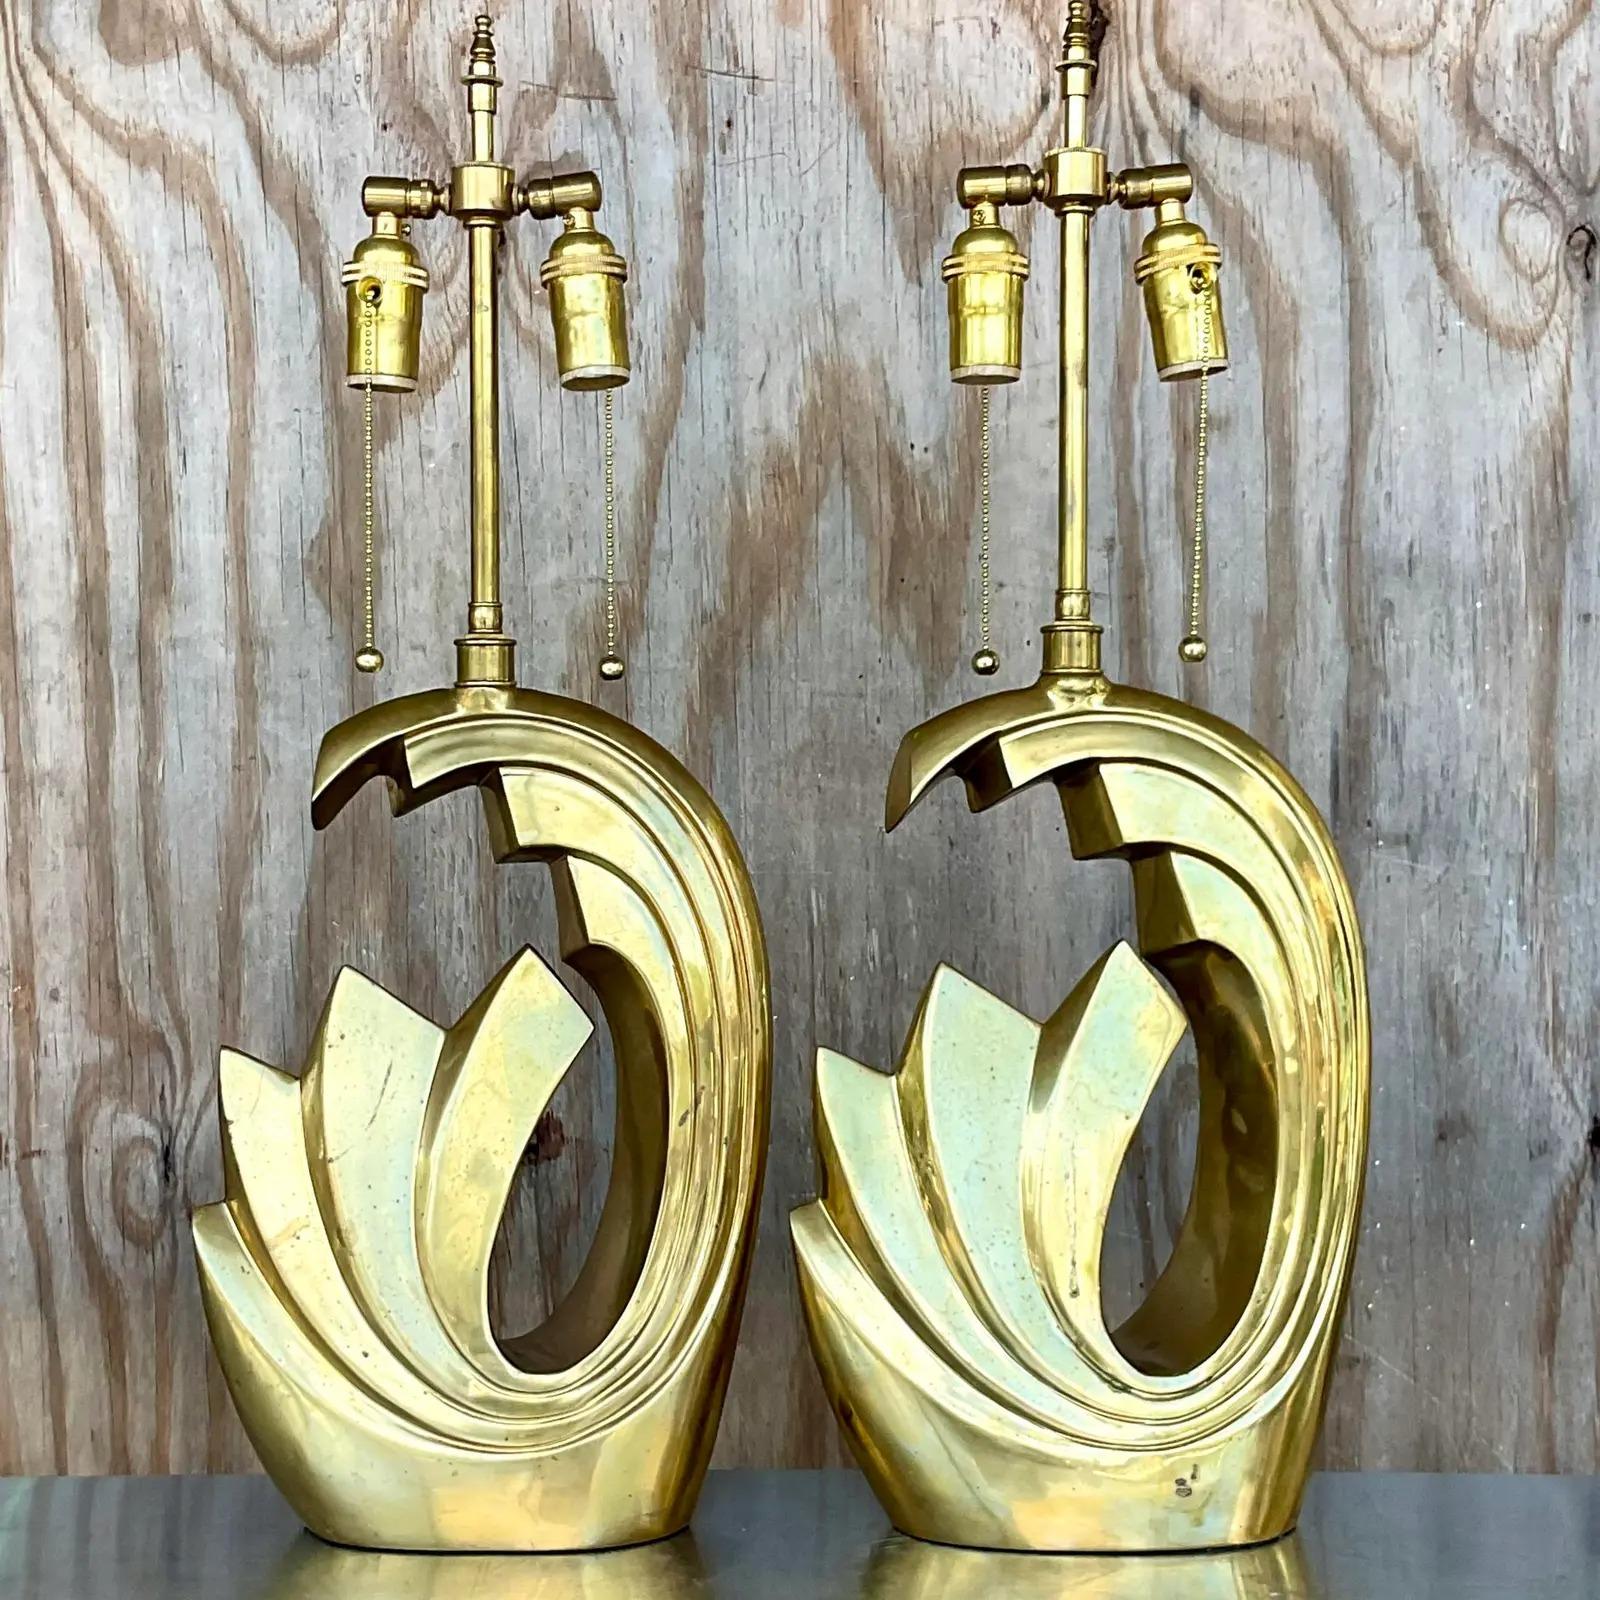 North American Vintage MCM Pierre Cardin C-86 Brass Wave Lamps, a Pair